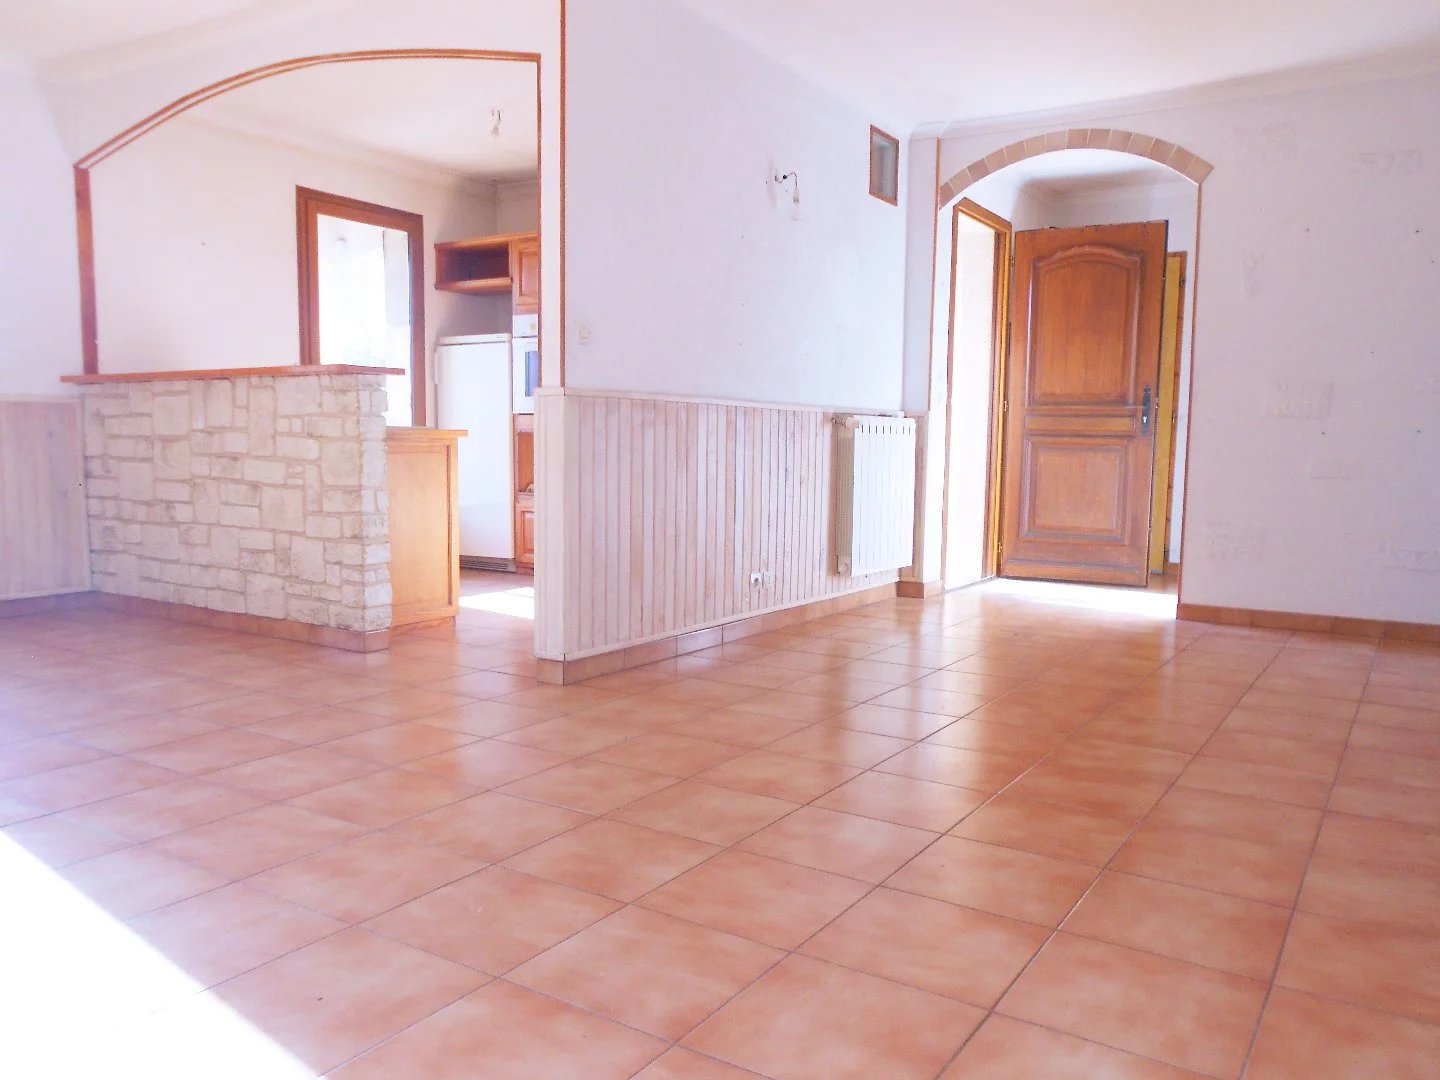 Sold property house 5 rooms in Beaucaire 30300 102 m²